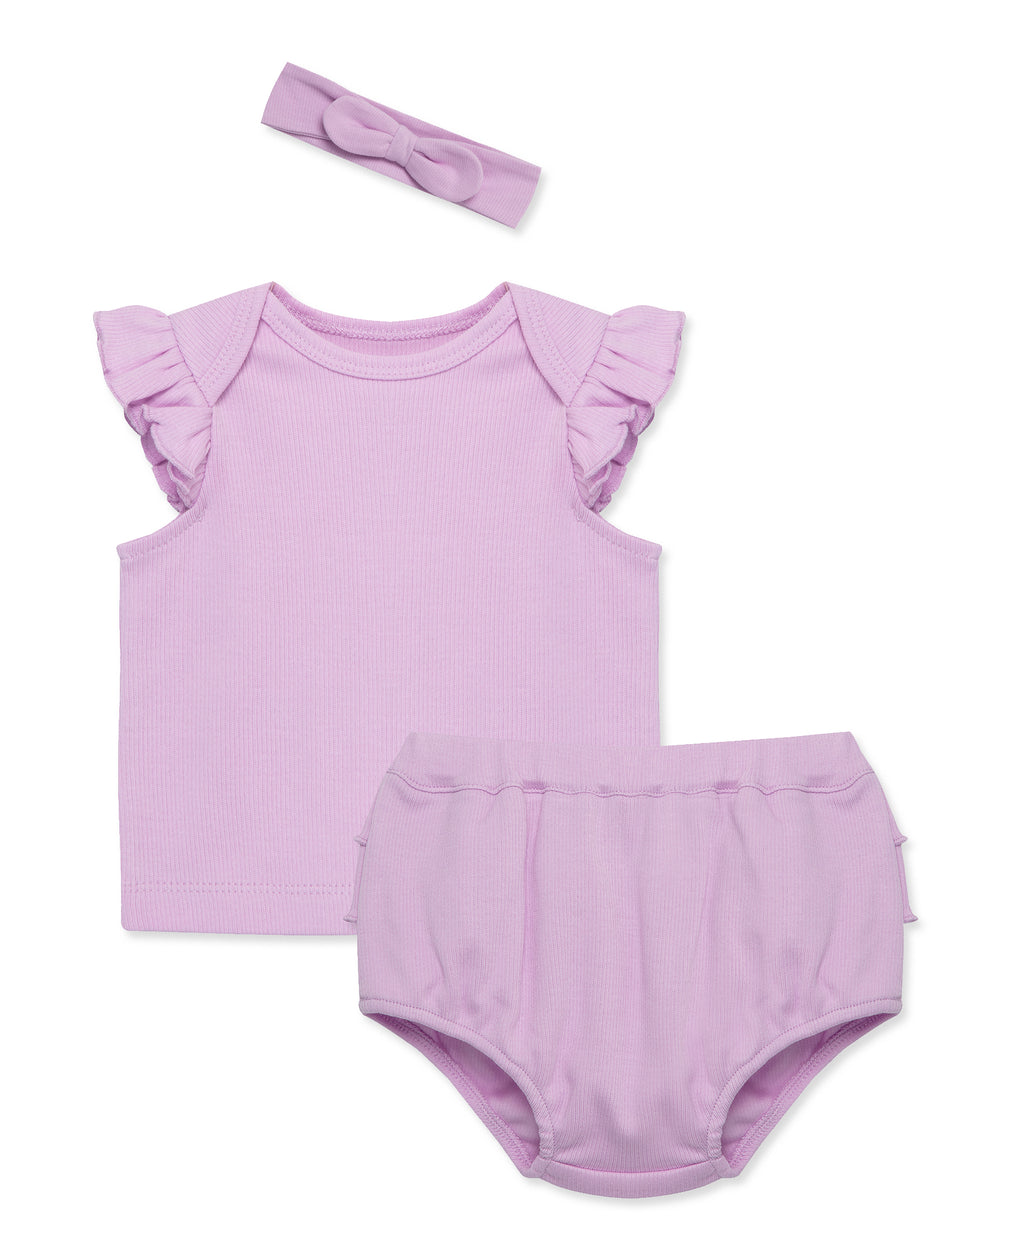 Lilac Ruffle Top with Bloomer & Headband Set - Little Me